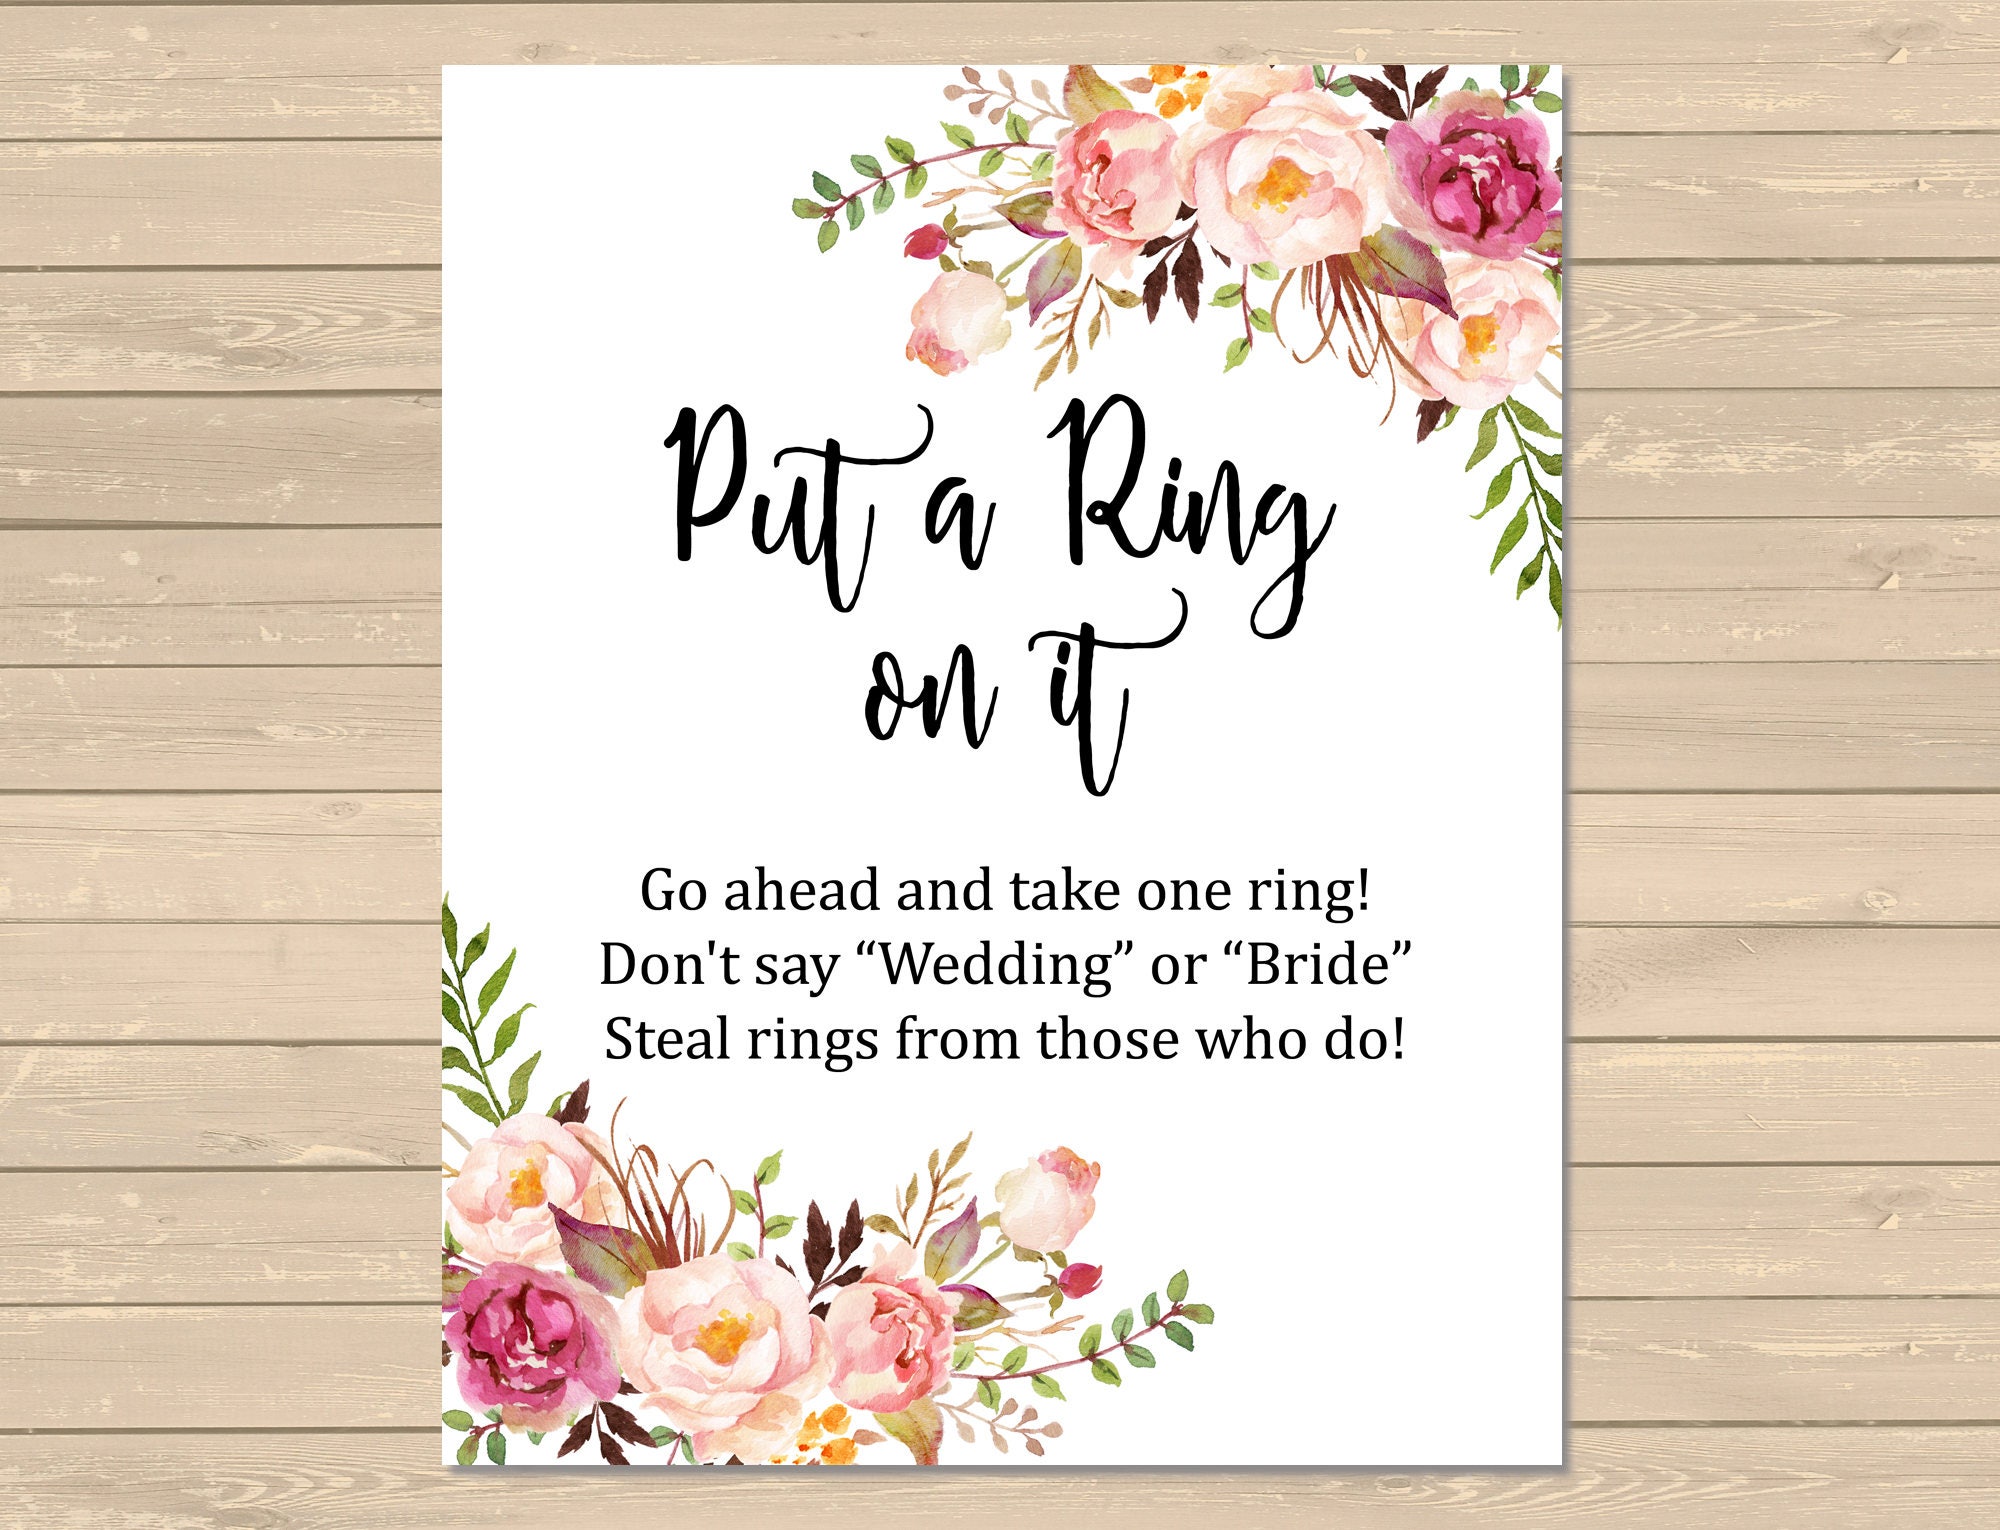 Put A Ring On It Bridal Shower Game Free Printable